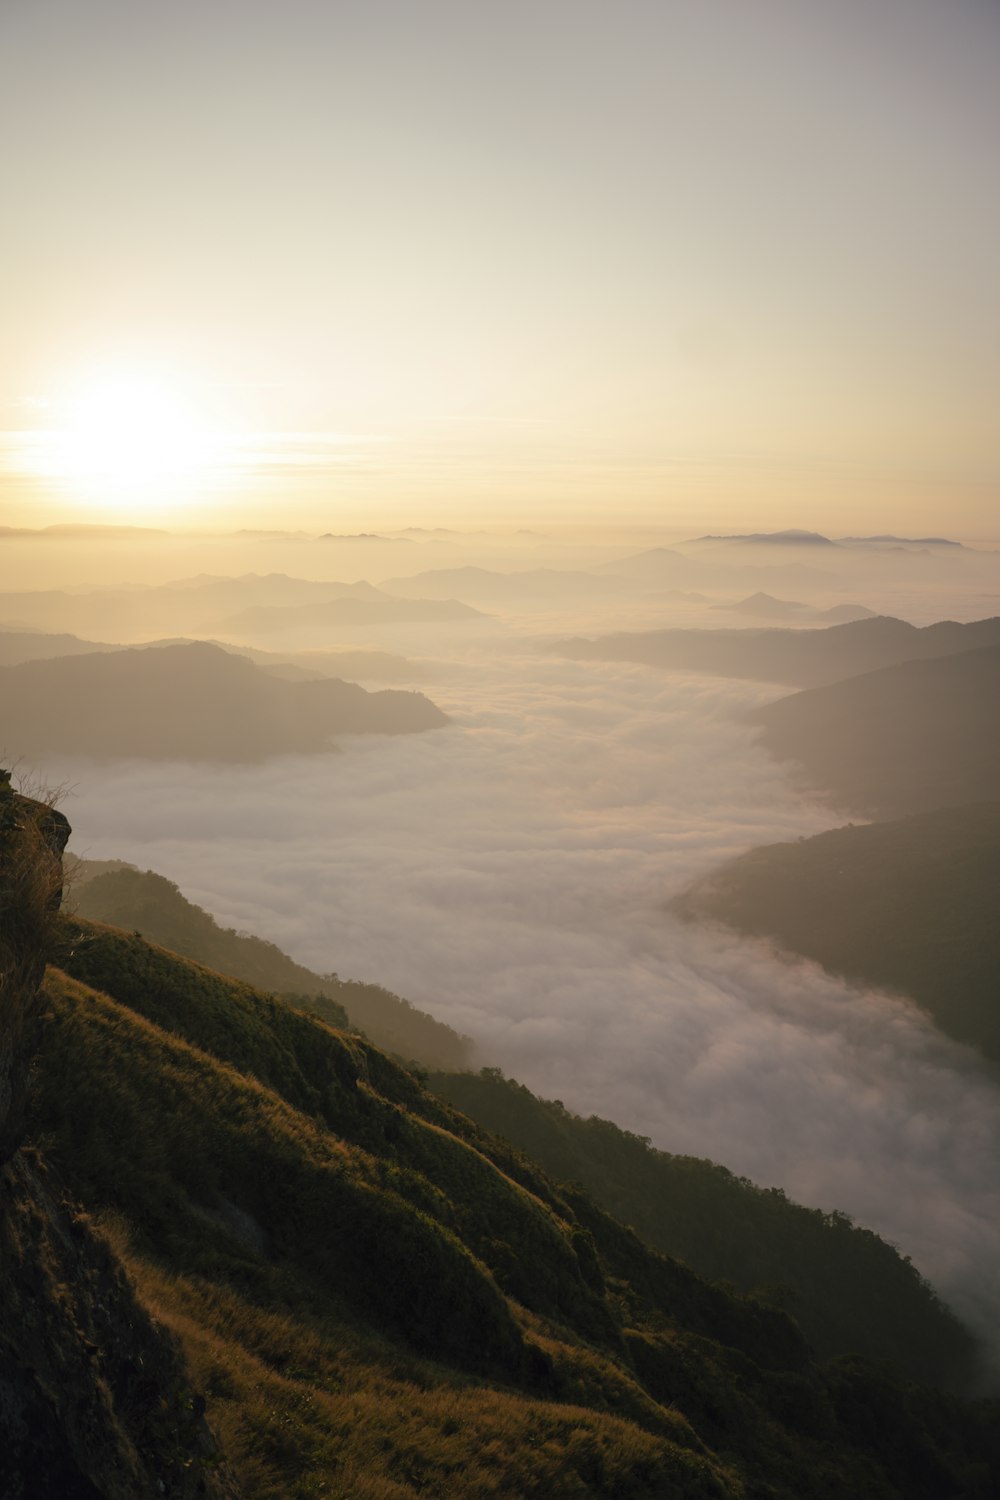 a person standing on top of a mountain overlooking a foggy valley